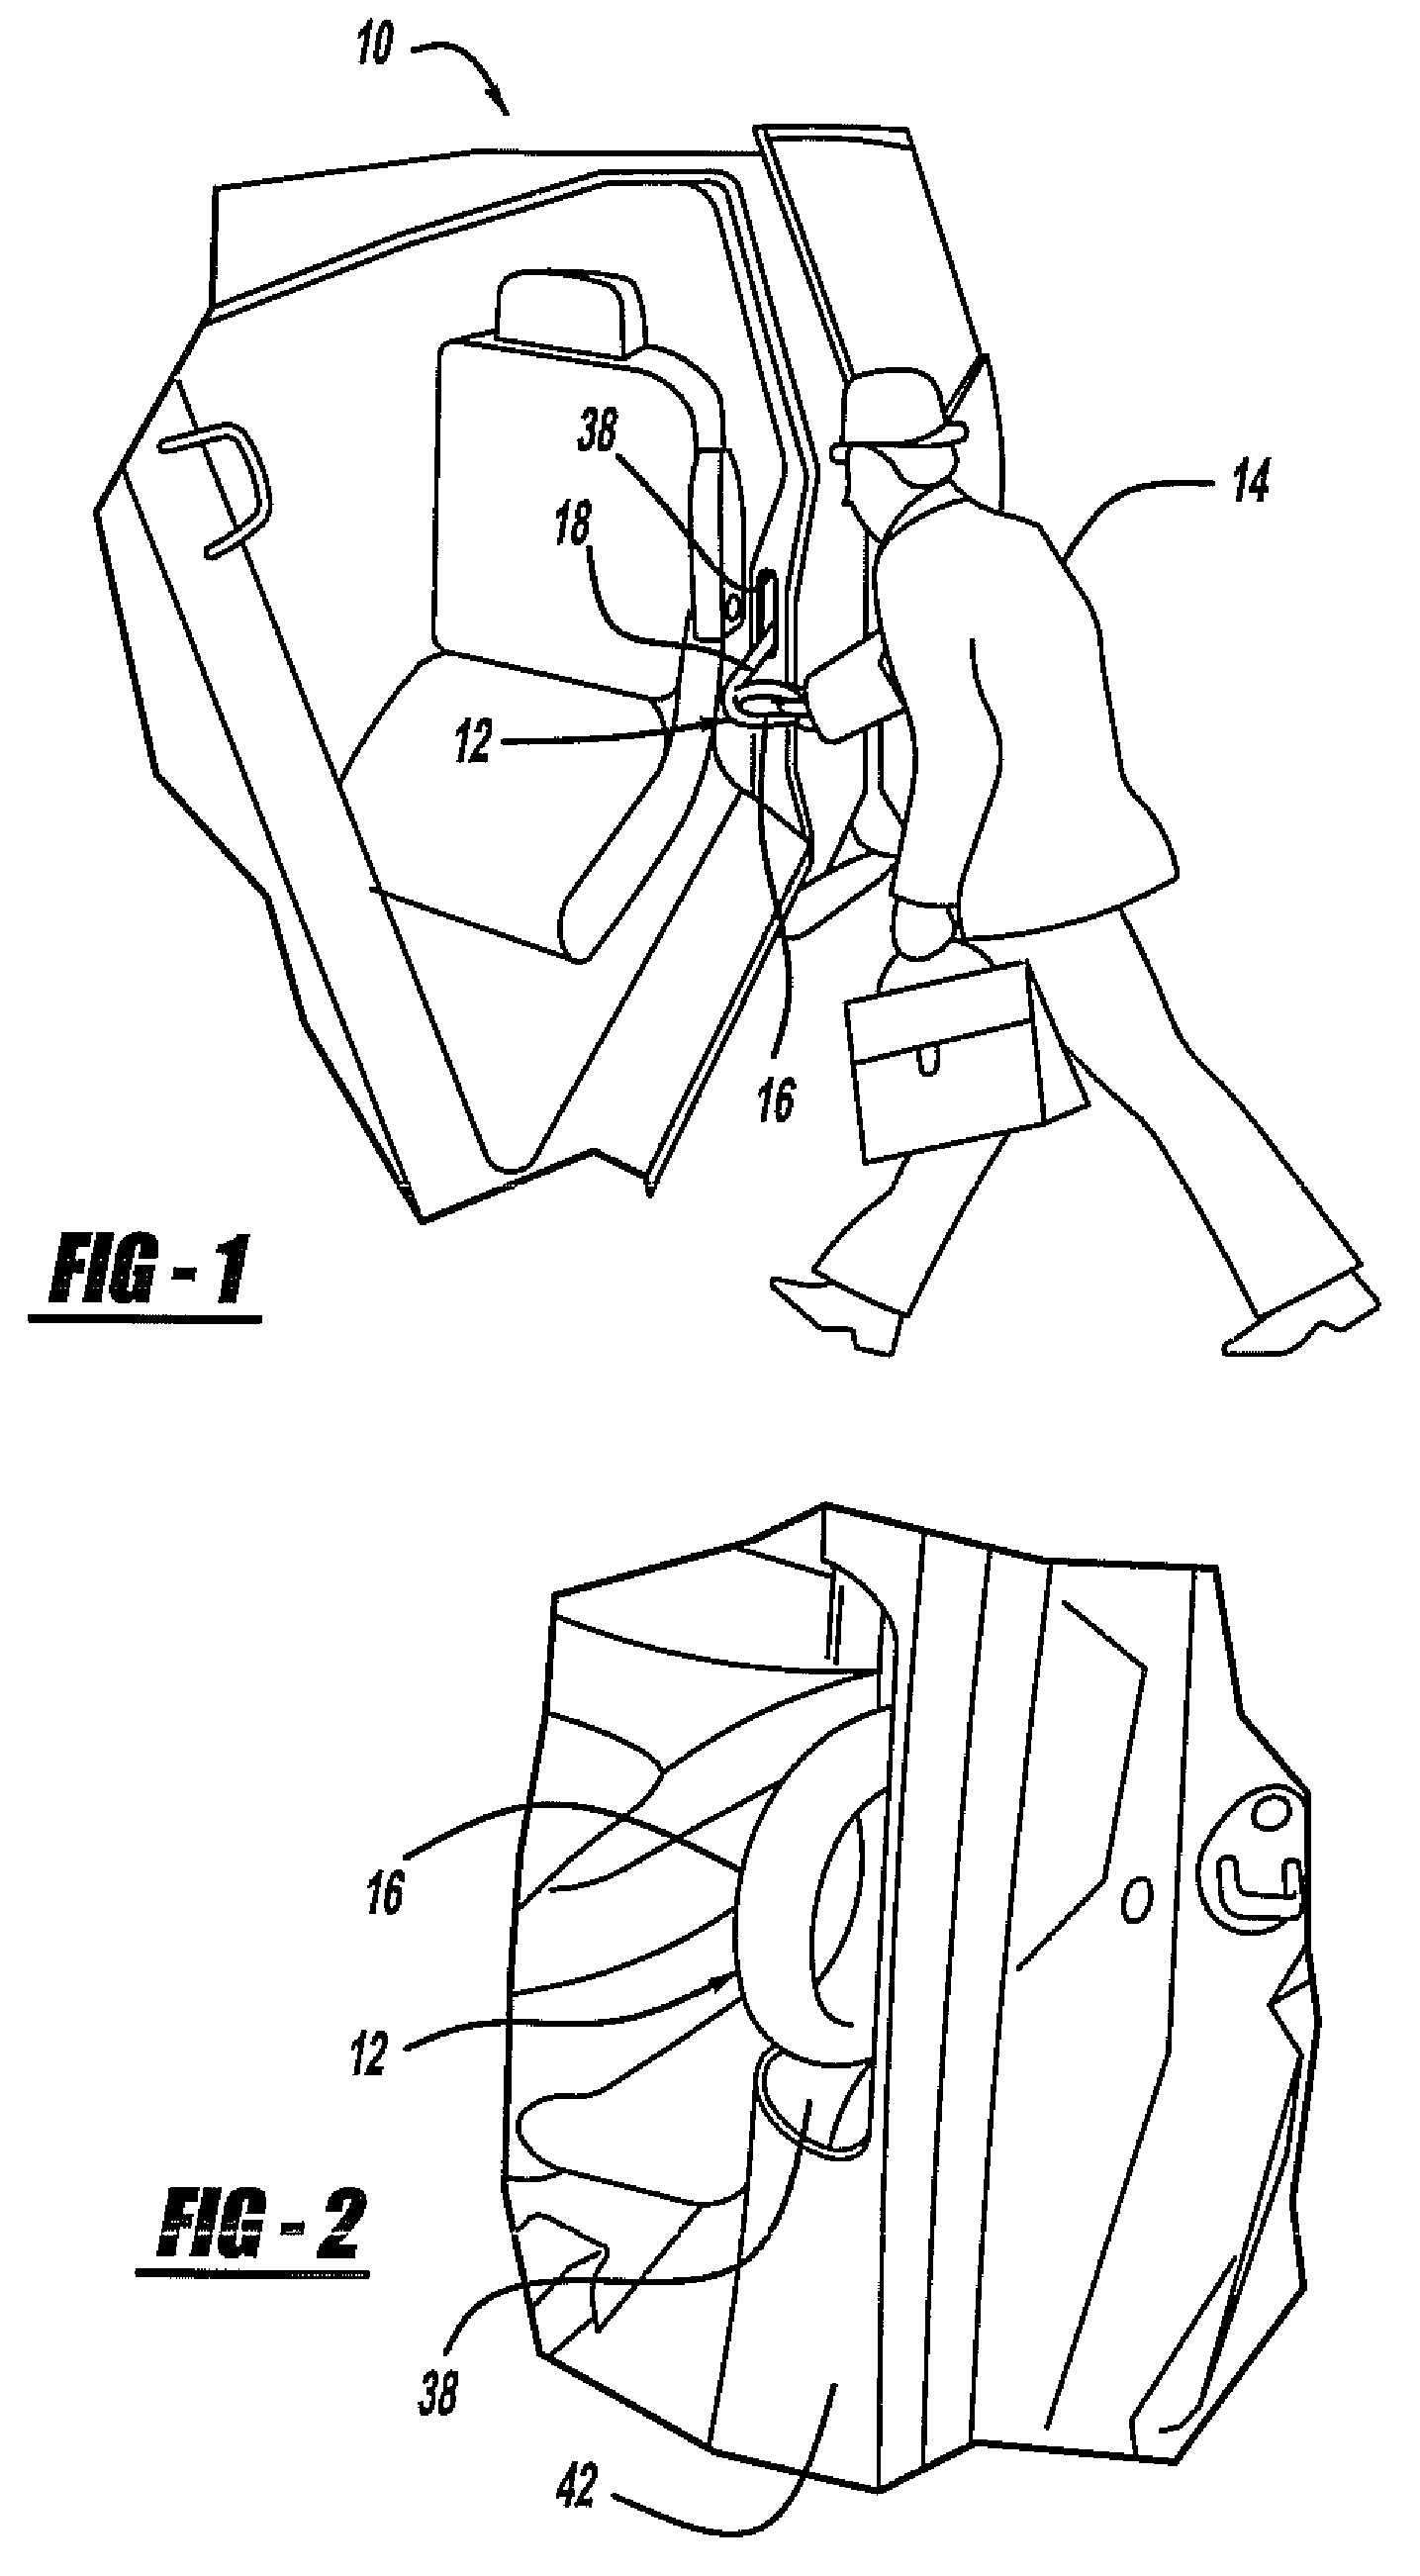 Retractable assist handle for a vehicle